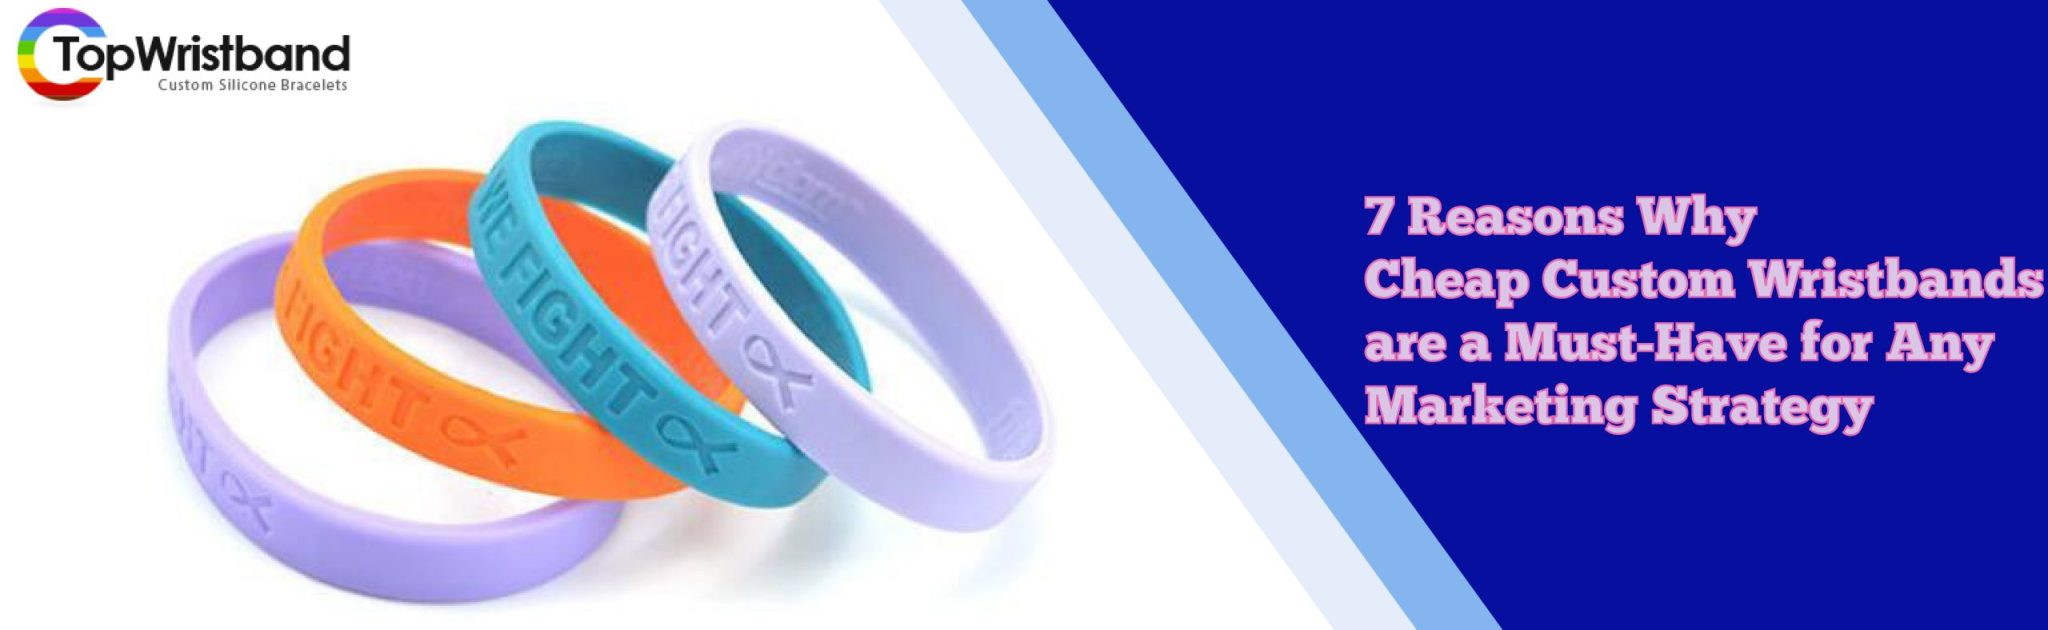 7 Reasons Why Cheap Custom Wristbands are a Must-Have for Any Marketing Strategy